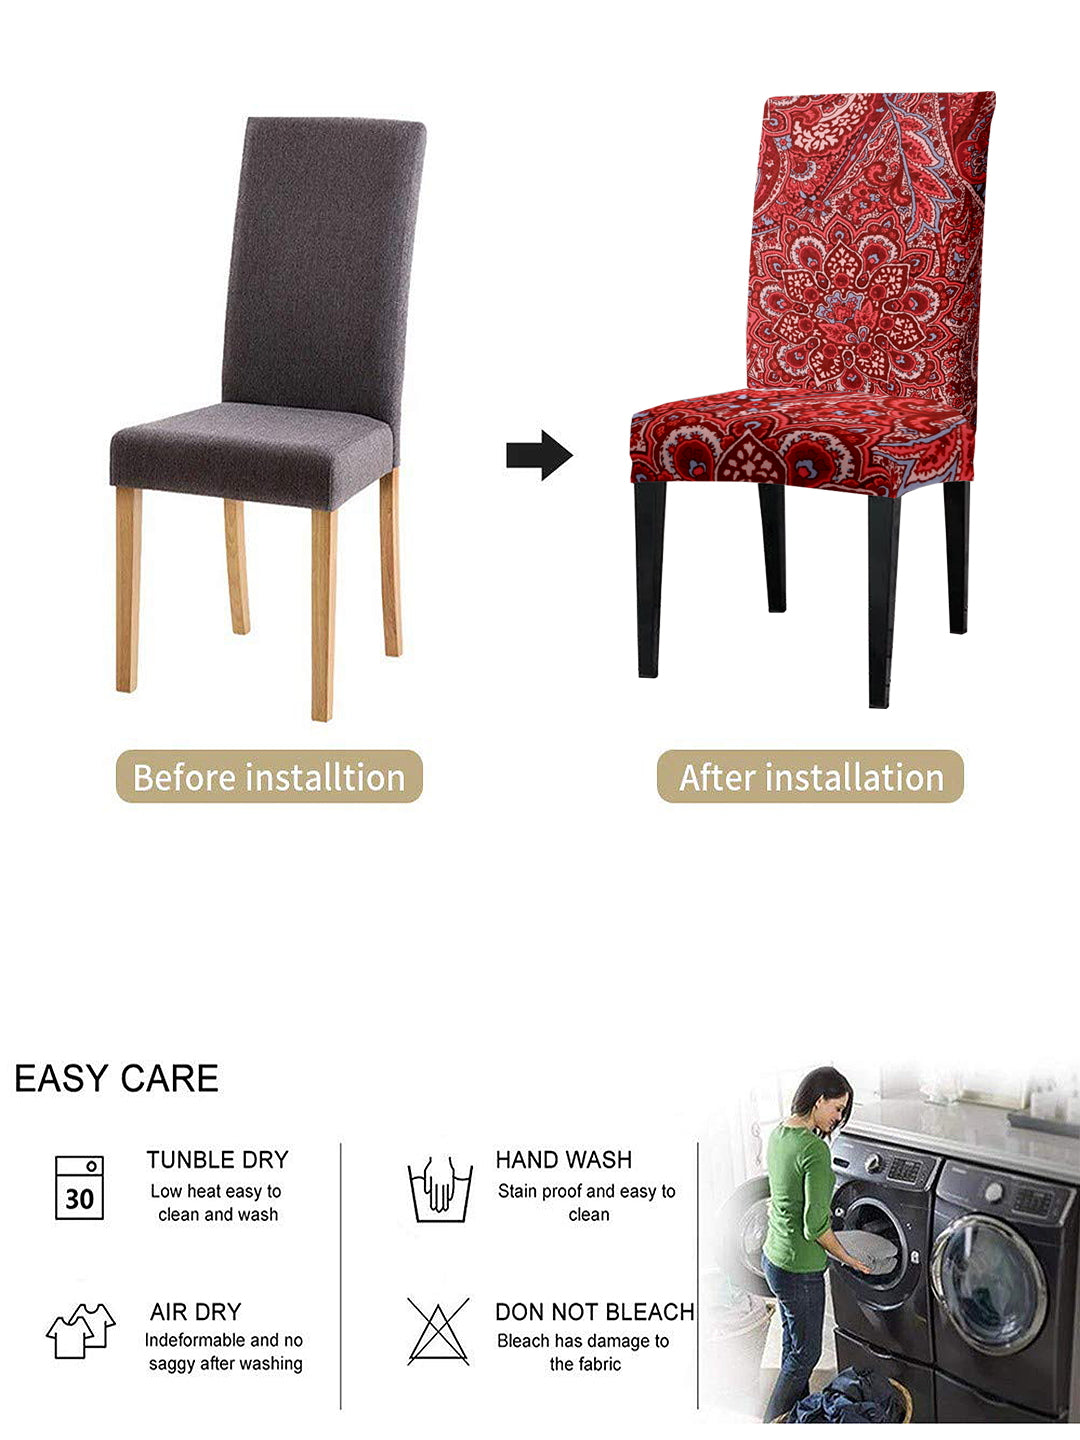 Stretchable Dining Chair Cover Ethnic Printed Set of 2 - Maroon